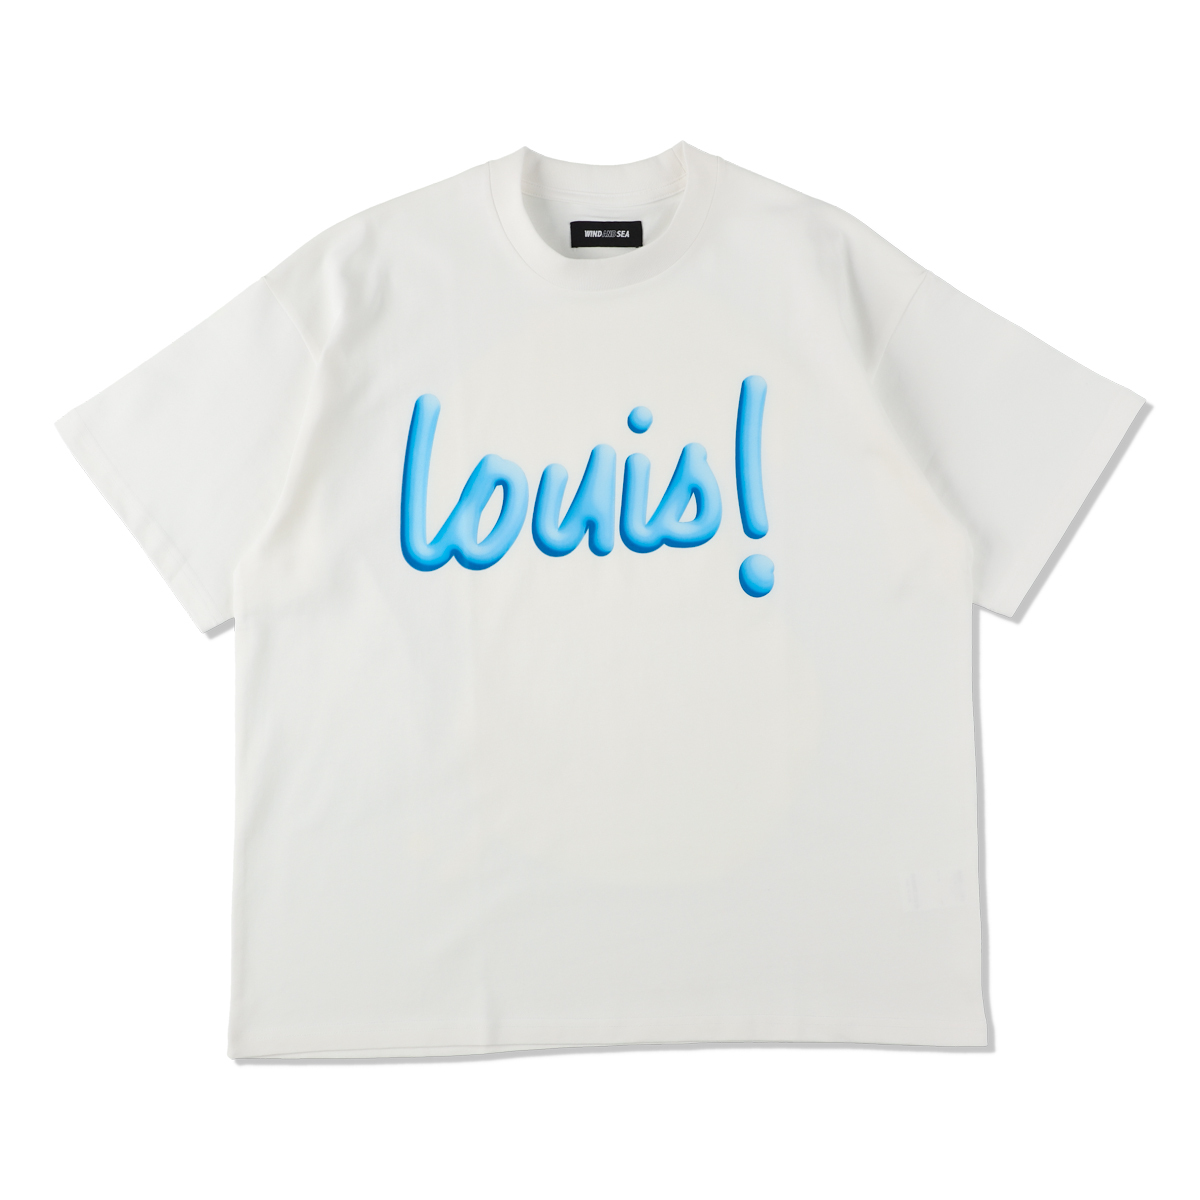 WIND AND SEA x RON LOUIS Paint Tee-